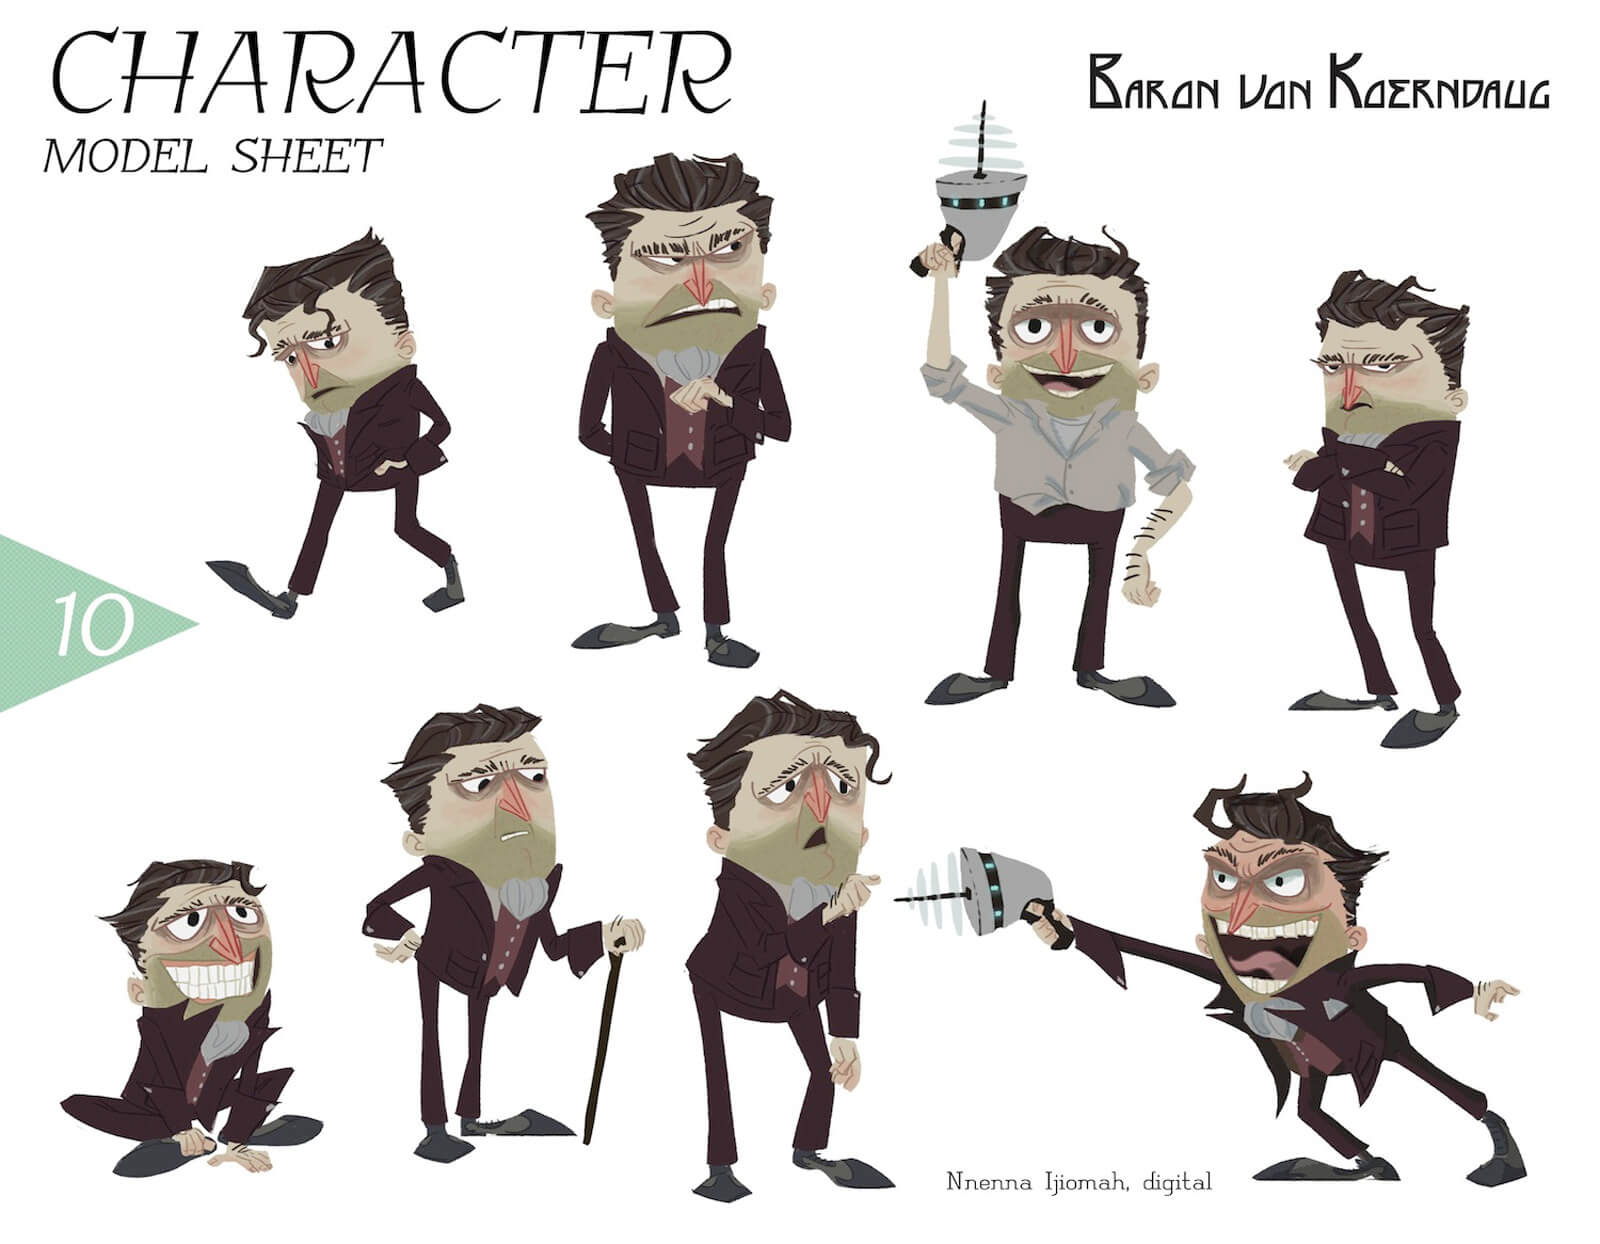 Model sheet for the character of Baron von Koerndaug, including actions and expressions from walking, sitting, sad, and angry